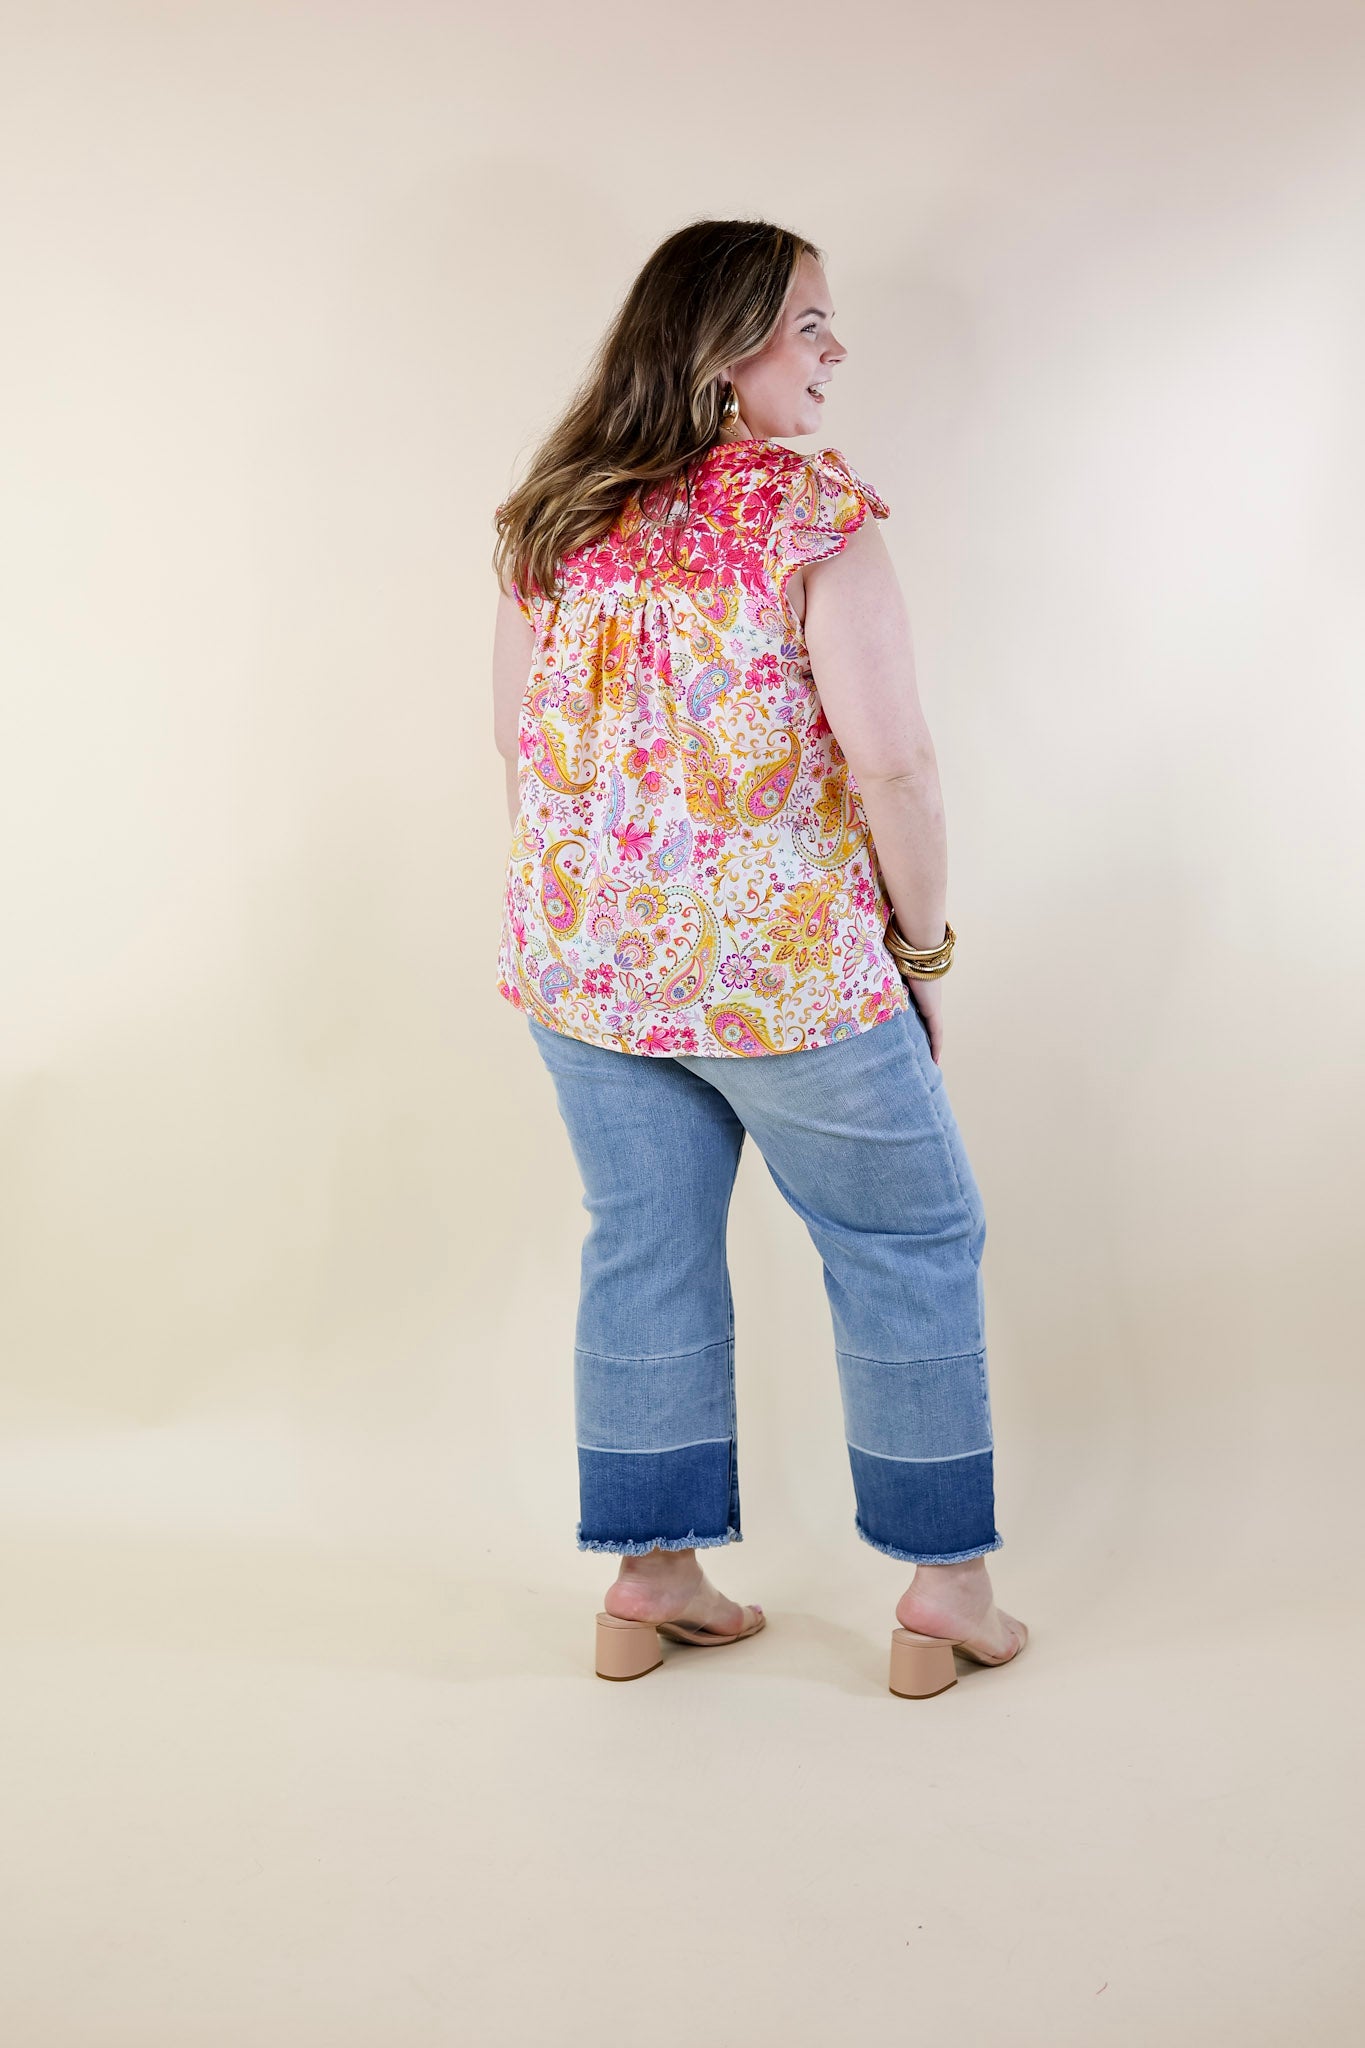 Serene Splendor Paisley Print Top with Pink Floral Embroidery in White - Giddy Up Glamour Boutique